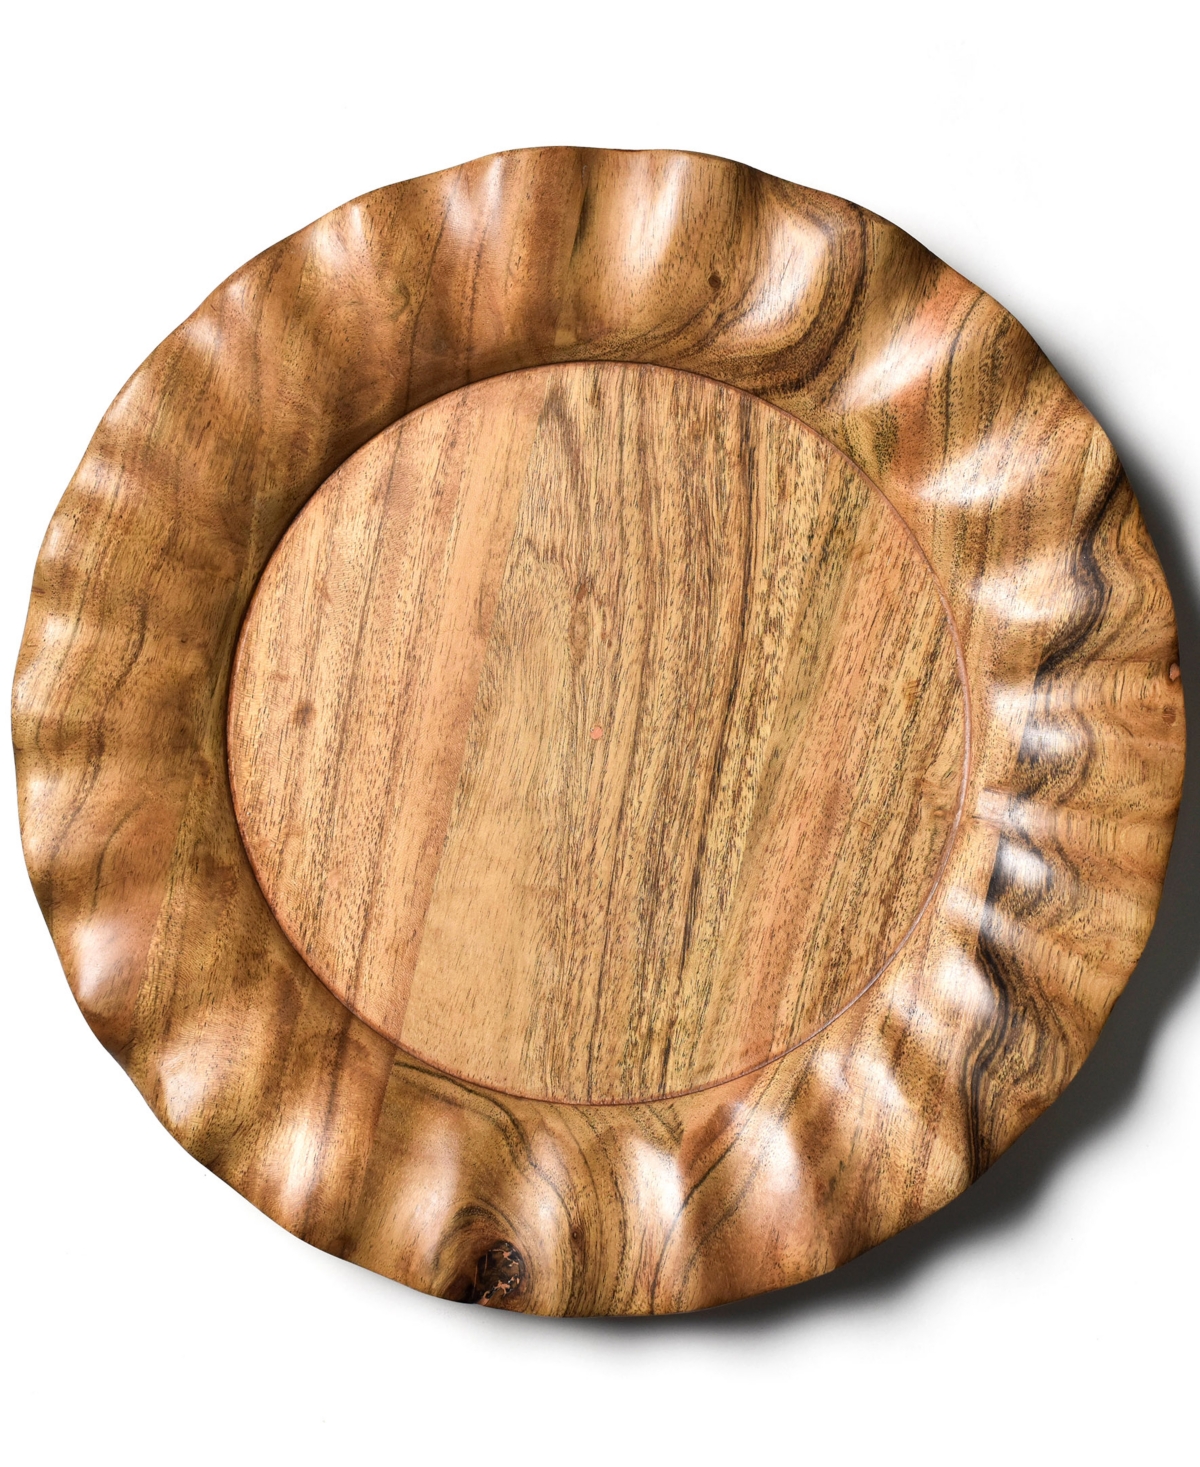 Coton Colors Fundamental Wood Ruffle Platter 13'', Service For 1 In Brown